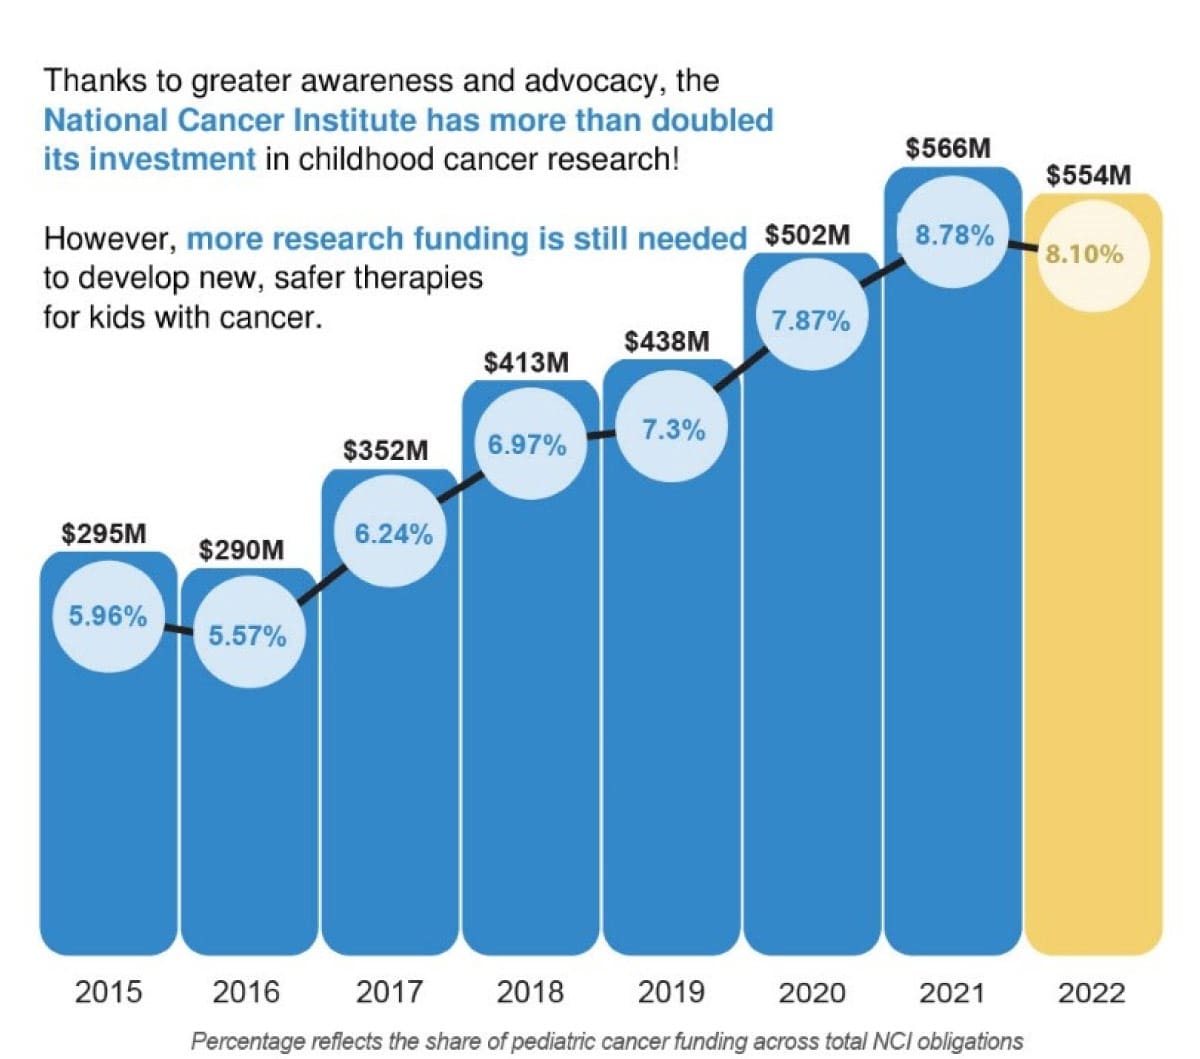 Bar graph showing the National Cancer Institute's investment in childhood cancer research from 2015 to 2022. 2015: $295M (5.96%), 2016: $290M (5.57%), 2017: $352M (6.24%), 2018: $413M (6.97%), 2019: $438M (7.3%), 2020: $502M (7.87%), 2021: $566M (8.78%), 2022: $554M (8.10%). The graph highlights that the investment has more than doubled from 2015 to 2022. The 2021 and 2022 bars are yellow, and the rest are blue. The text notes that more research funding is needed to develop safer therapies for kids with cancer. The percentage reflects the share of pediatric cancer funding across total NCI obligations.